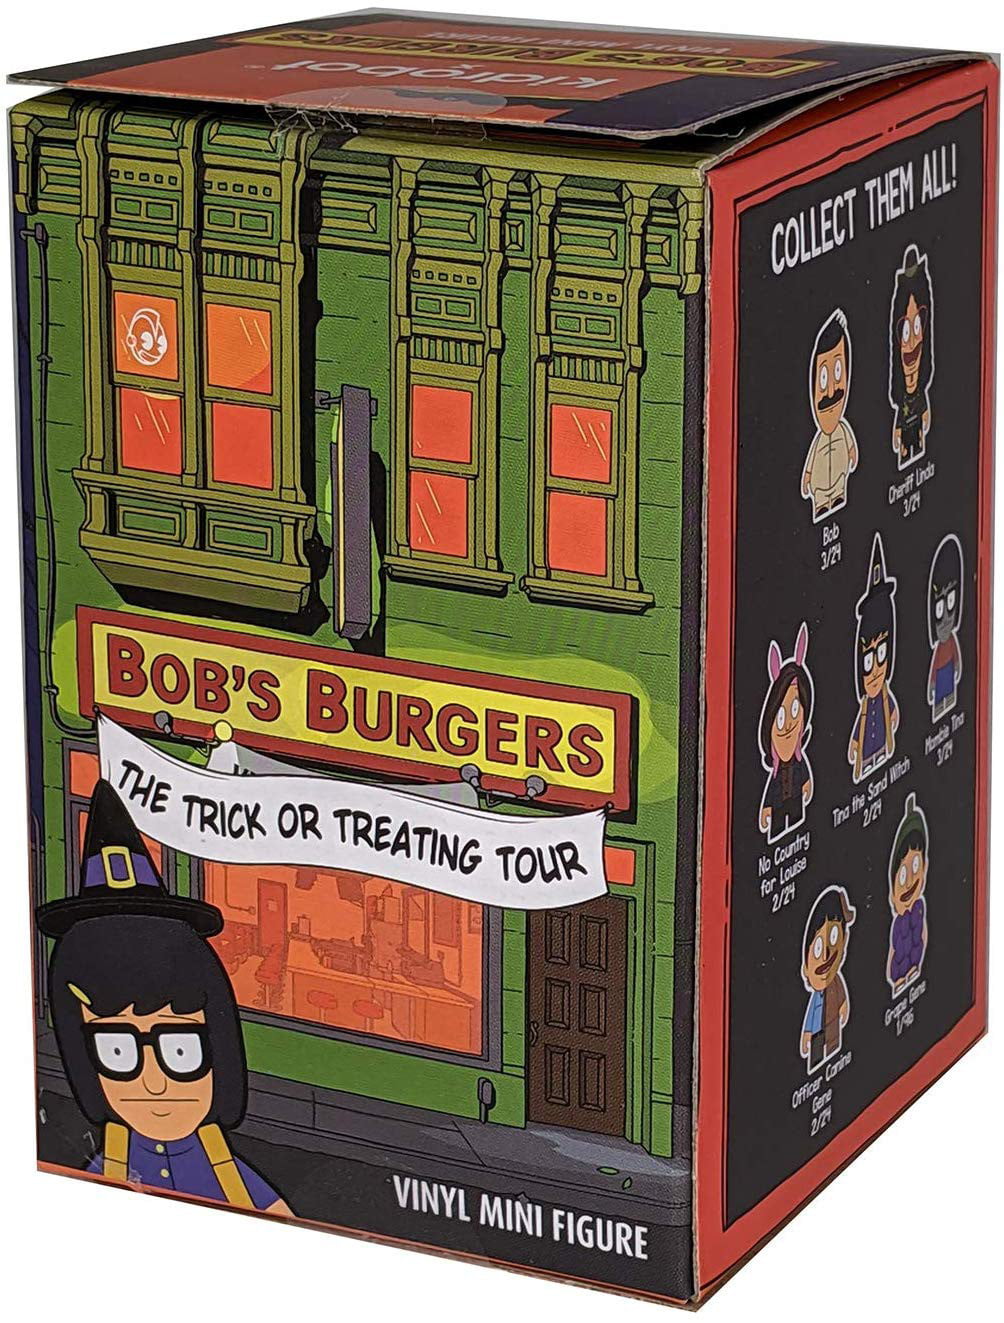 Bob's Burgers The Trick or Treating Tour Vinyl Mini Figure Officer Canine 